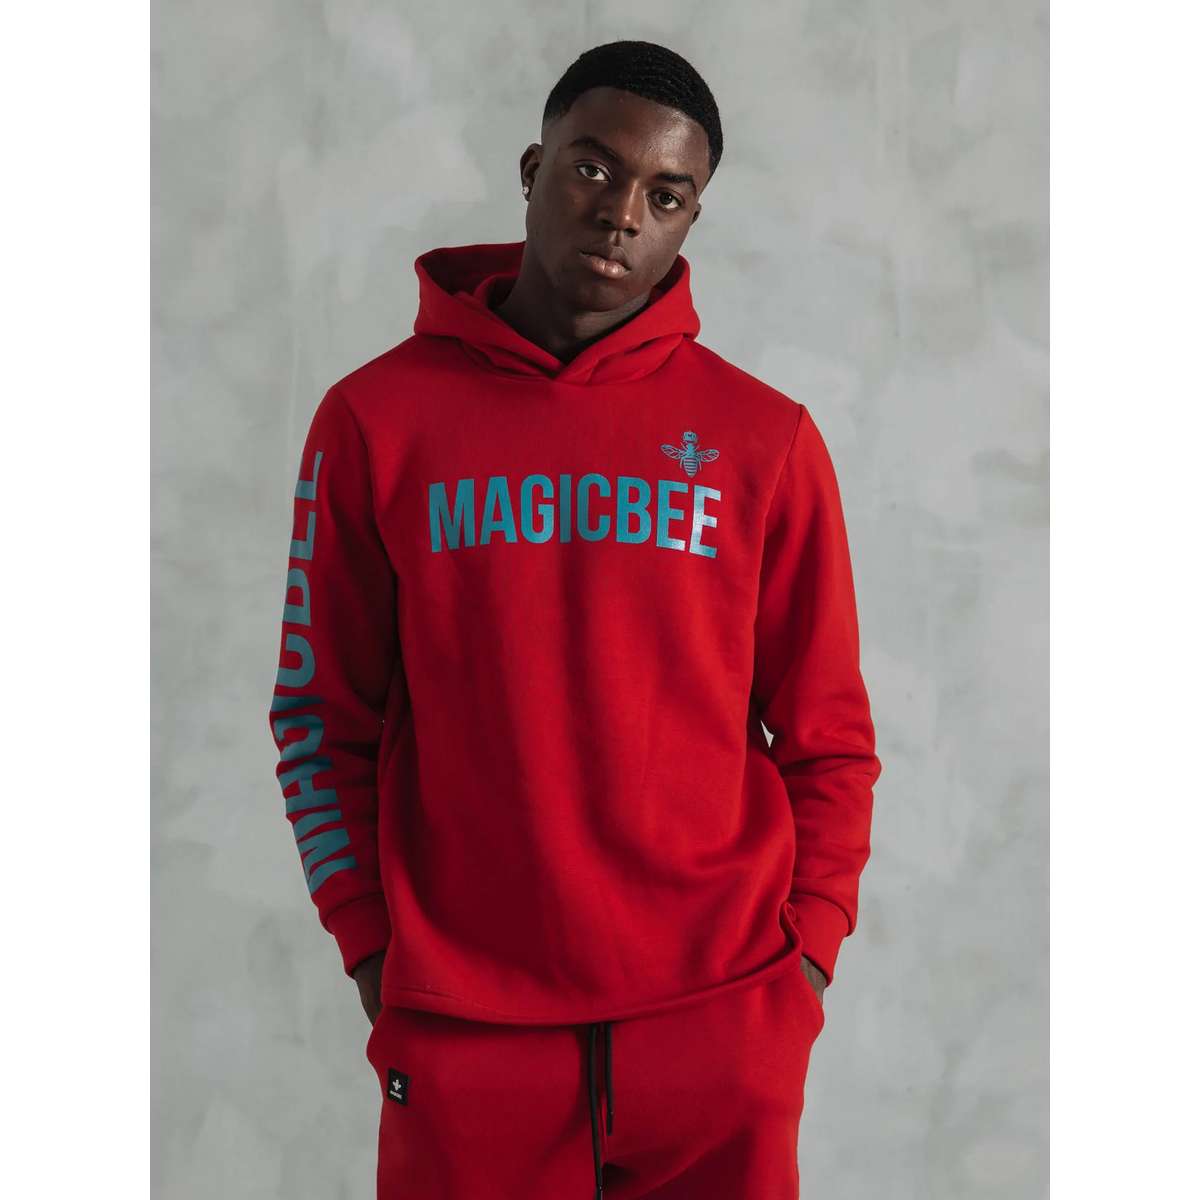 MAGICBEE DOUBLE LOGO HOODIE - MB22506 RED